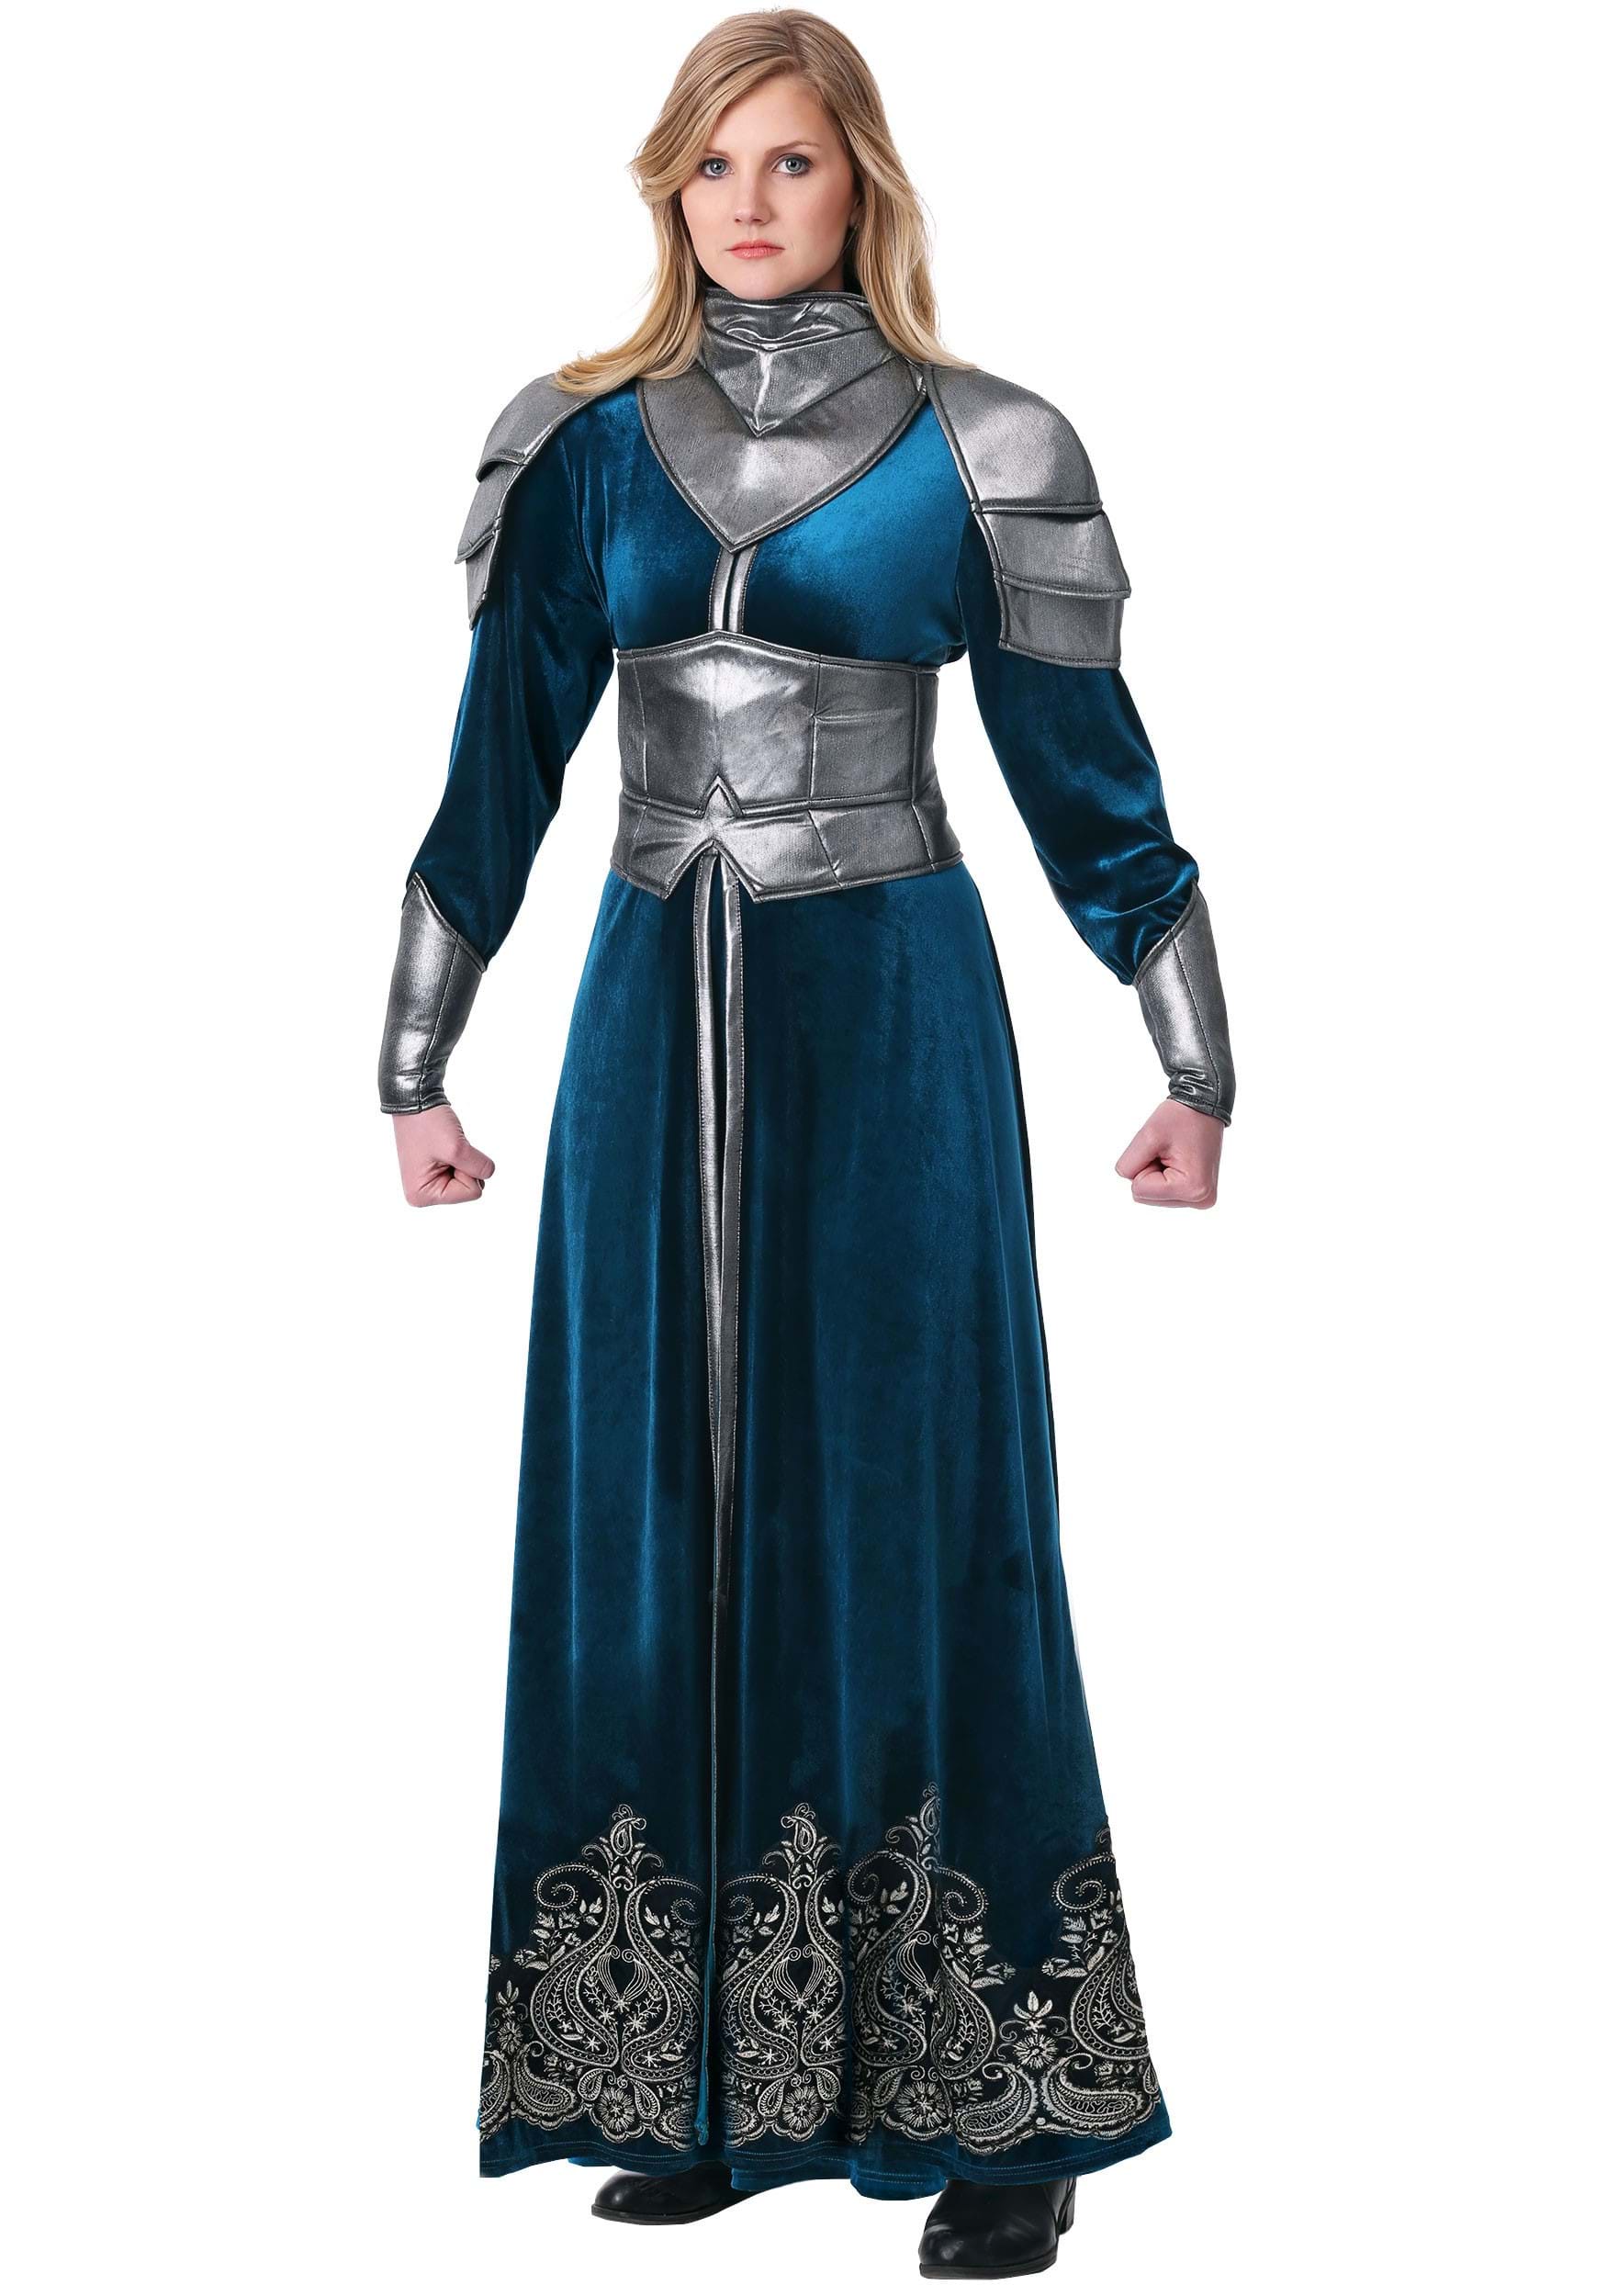 Image of Medieval Warrior Costume for Women ID FUN0409AD-L